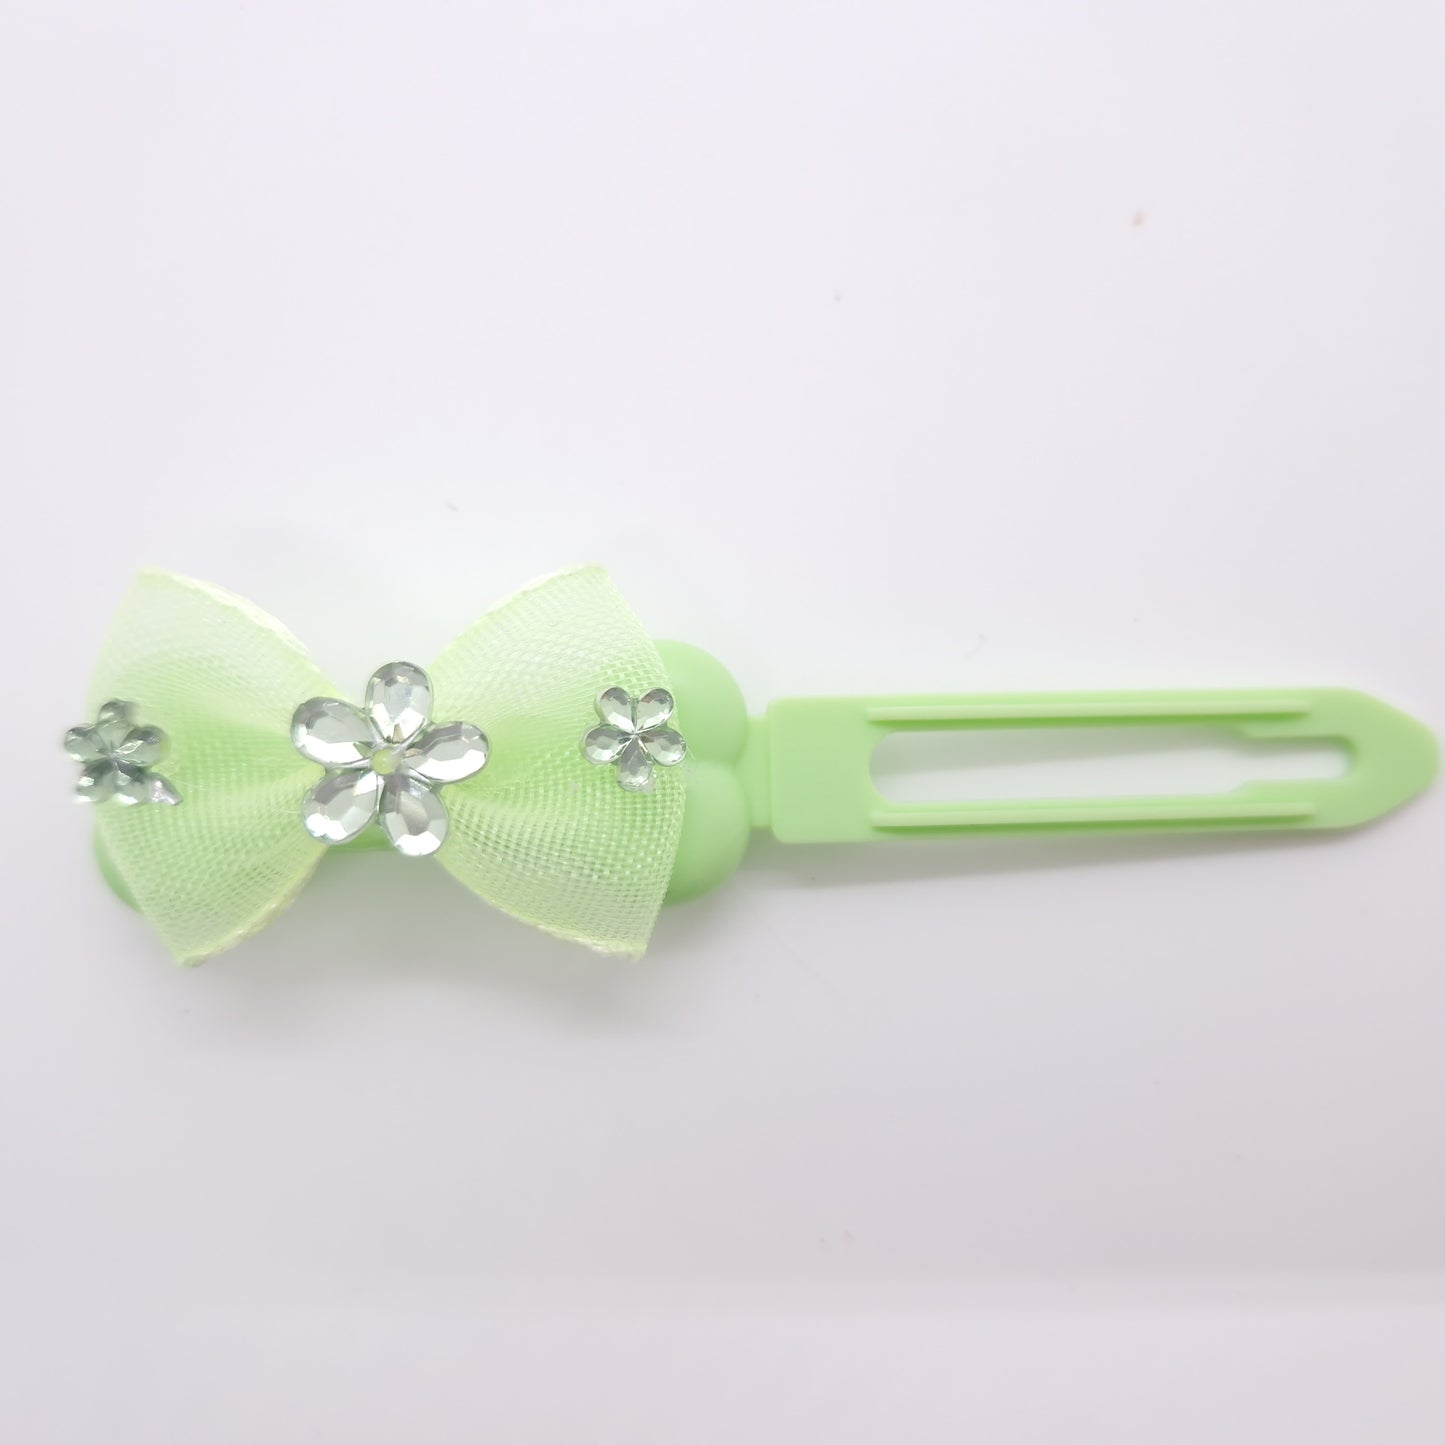 Soft Netted Bow with Flower Gems on 4.5cm & 3.5cm Clip